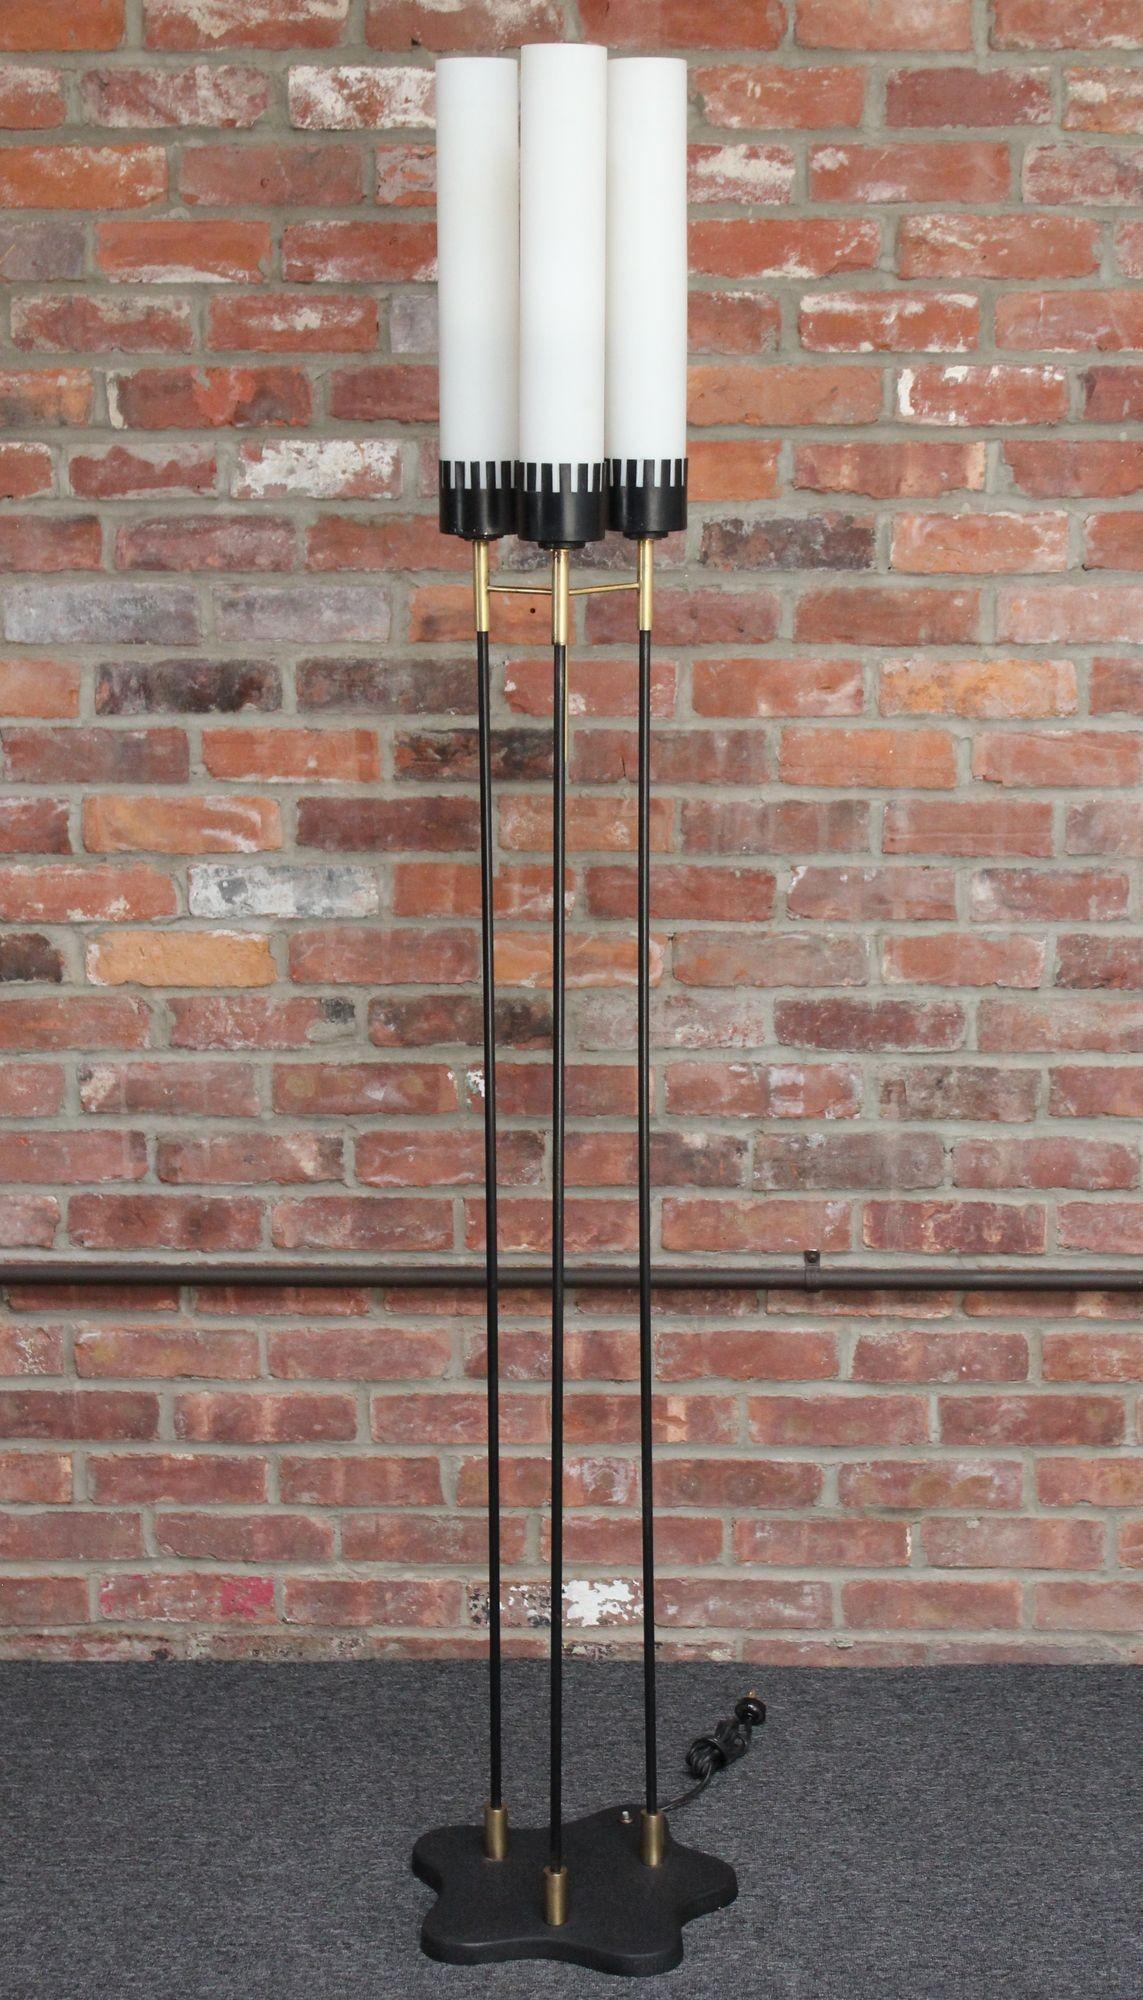 Triple socket floor lamp composed of black enameled-metal stems and steel base with brass accents and cased glass cylindrical fixtures by Stilnovo (Italy, ca. 1950s).
The three sockets are housed within cut metal 'receptacles' resembling